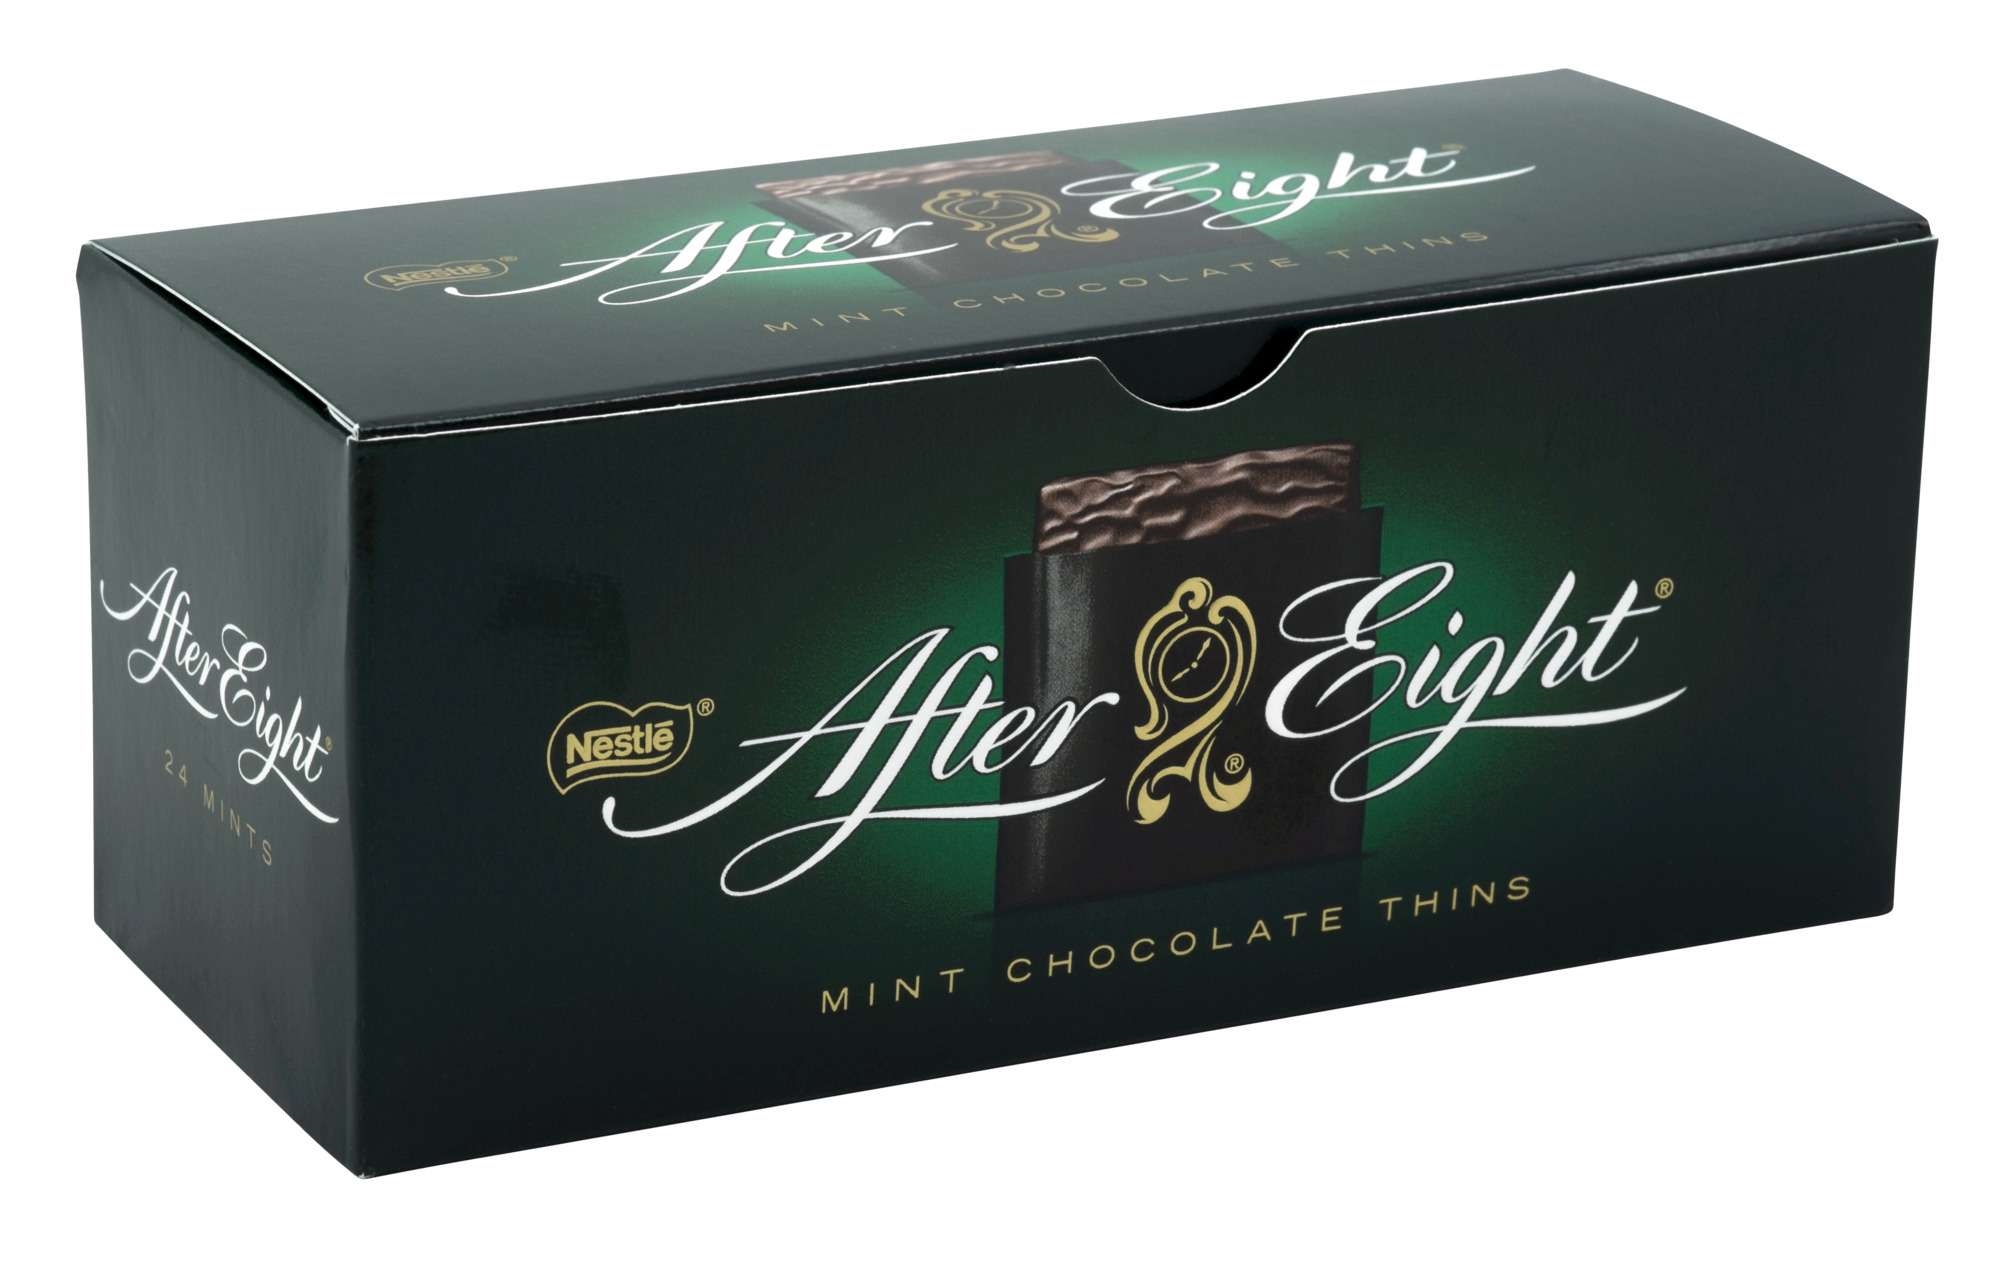 After eight        200g